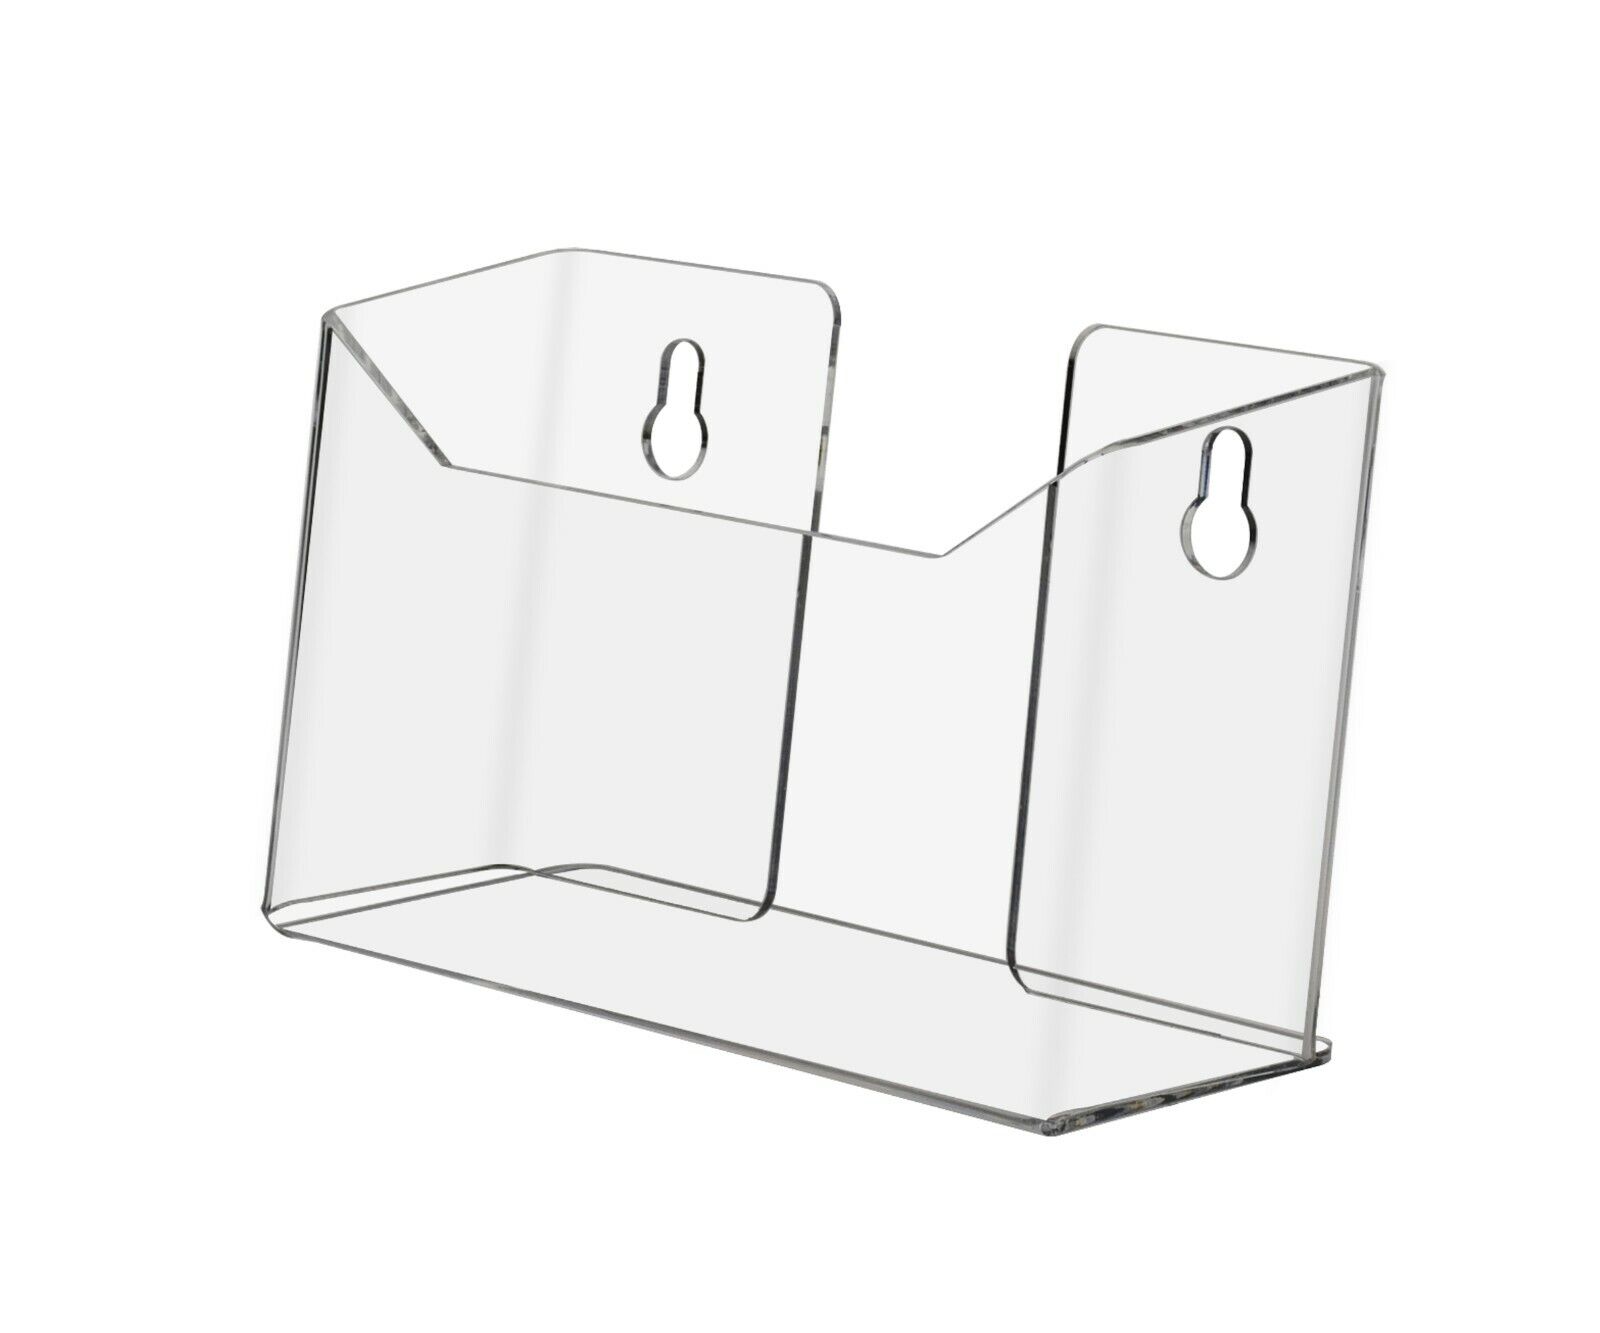 Postcard Holder Literature Display 6.5”W Wall Mount Clear Acrylic Lot of 6 Marketing Holders Does Not Apply - фотография #3